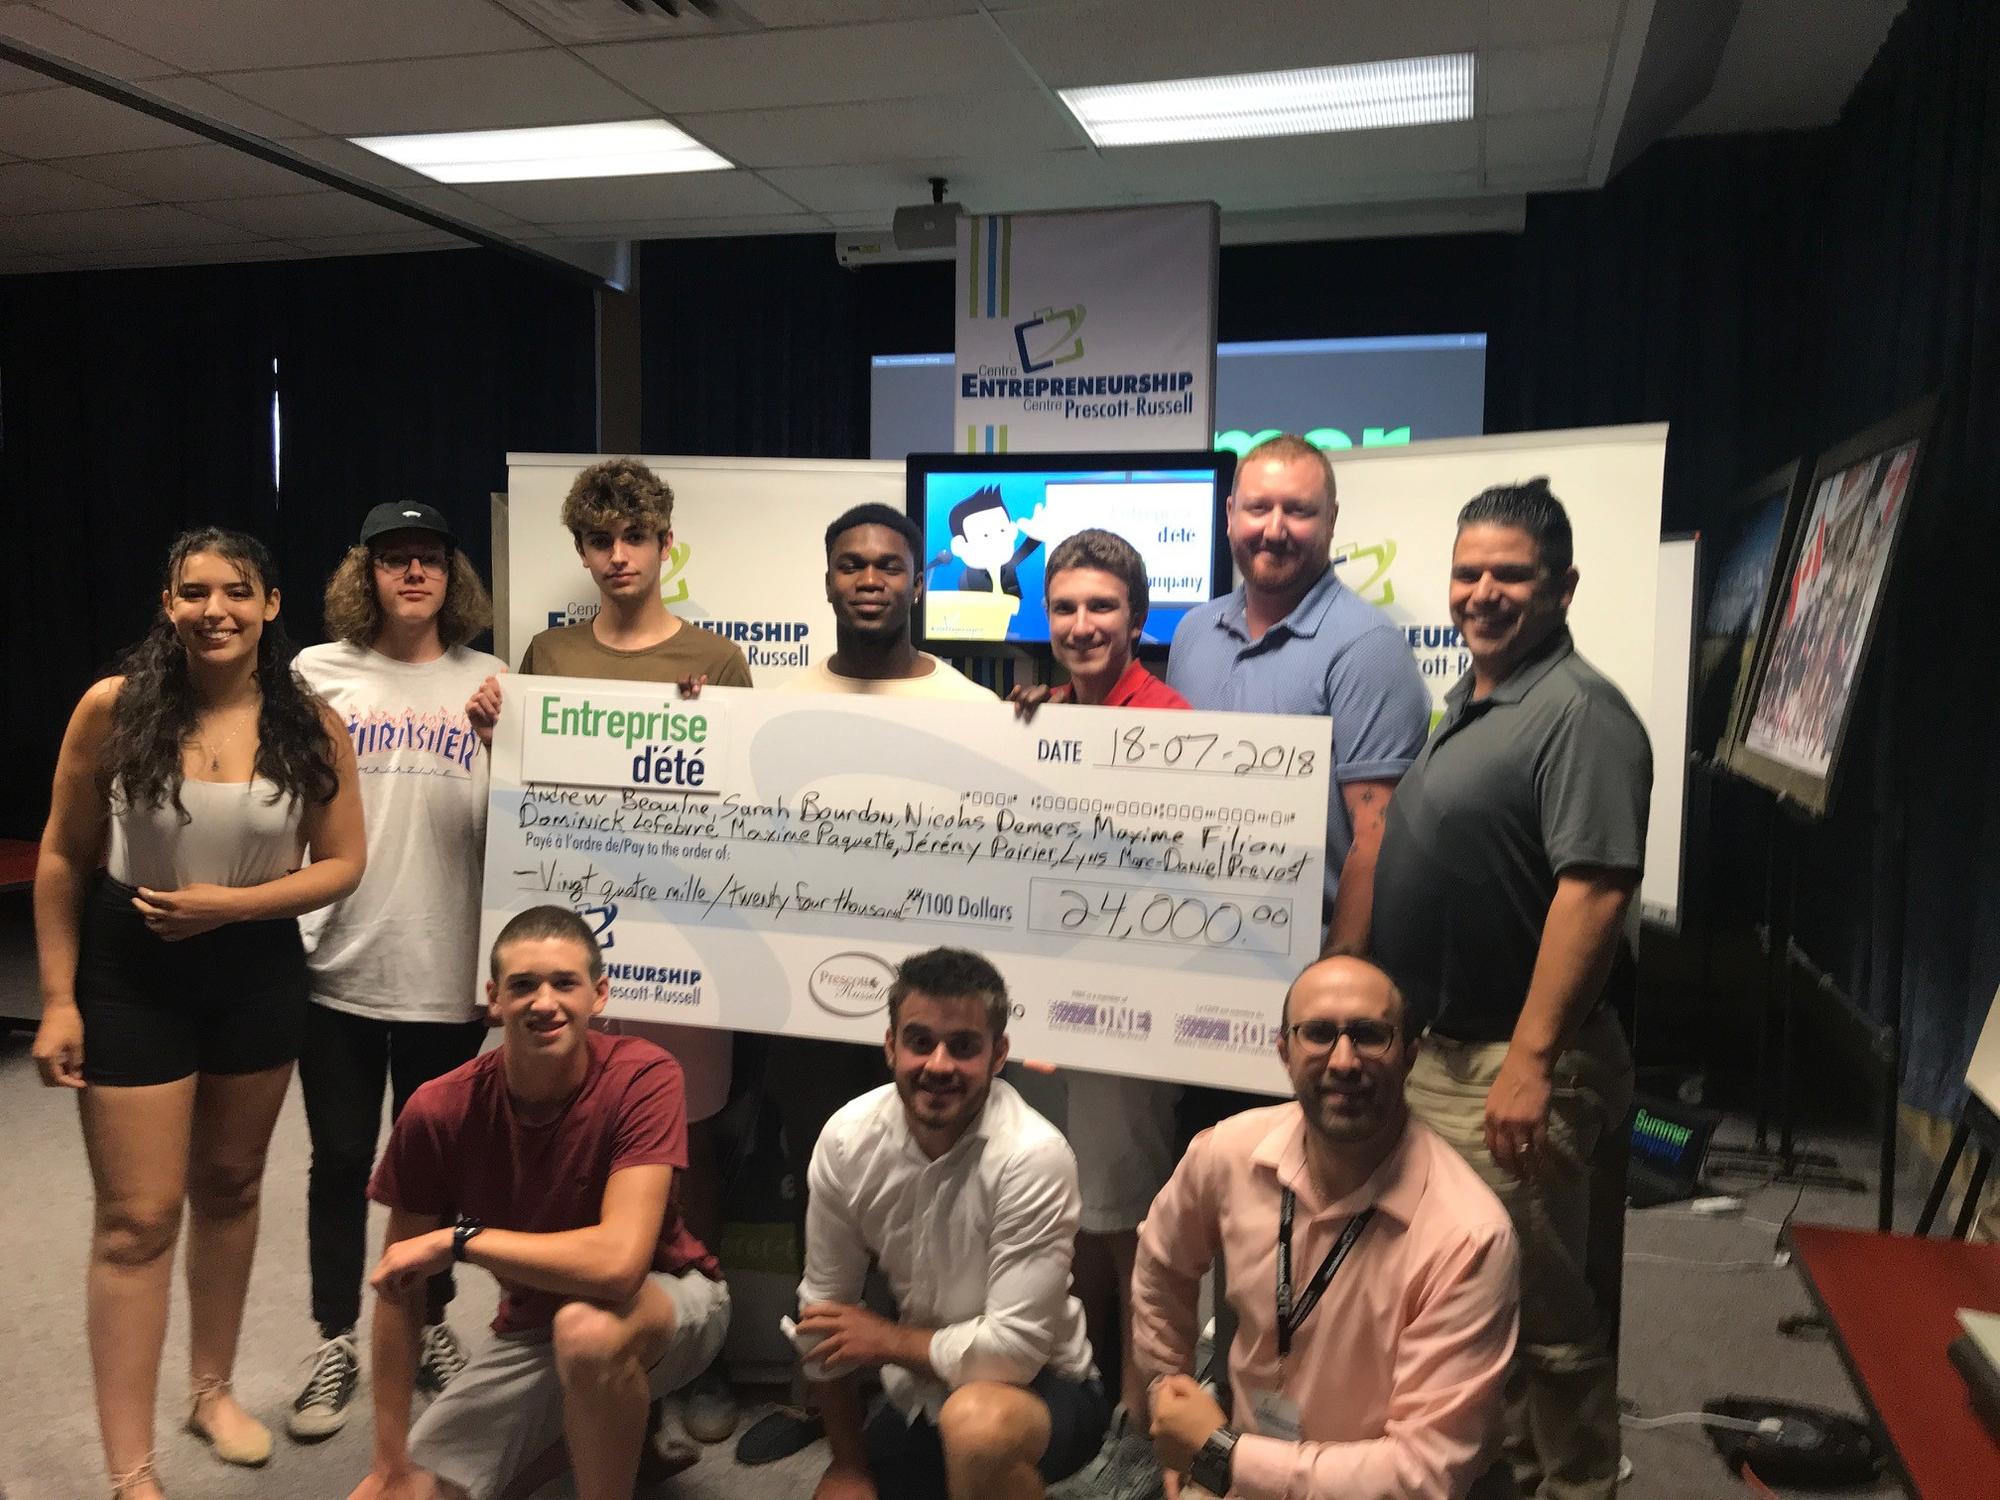 A total of $24,000 in grants to eight young entrepreneurs for business start-ups